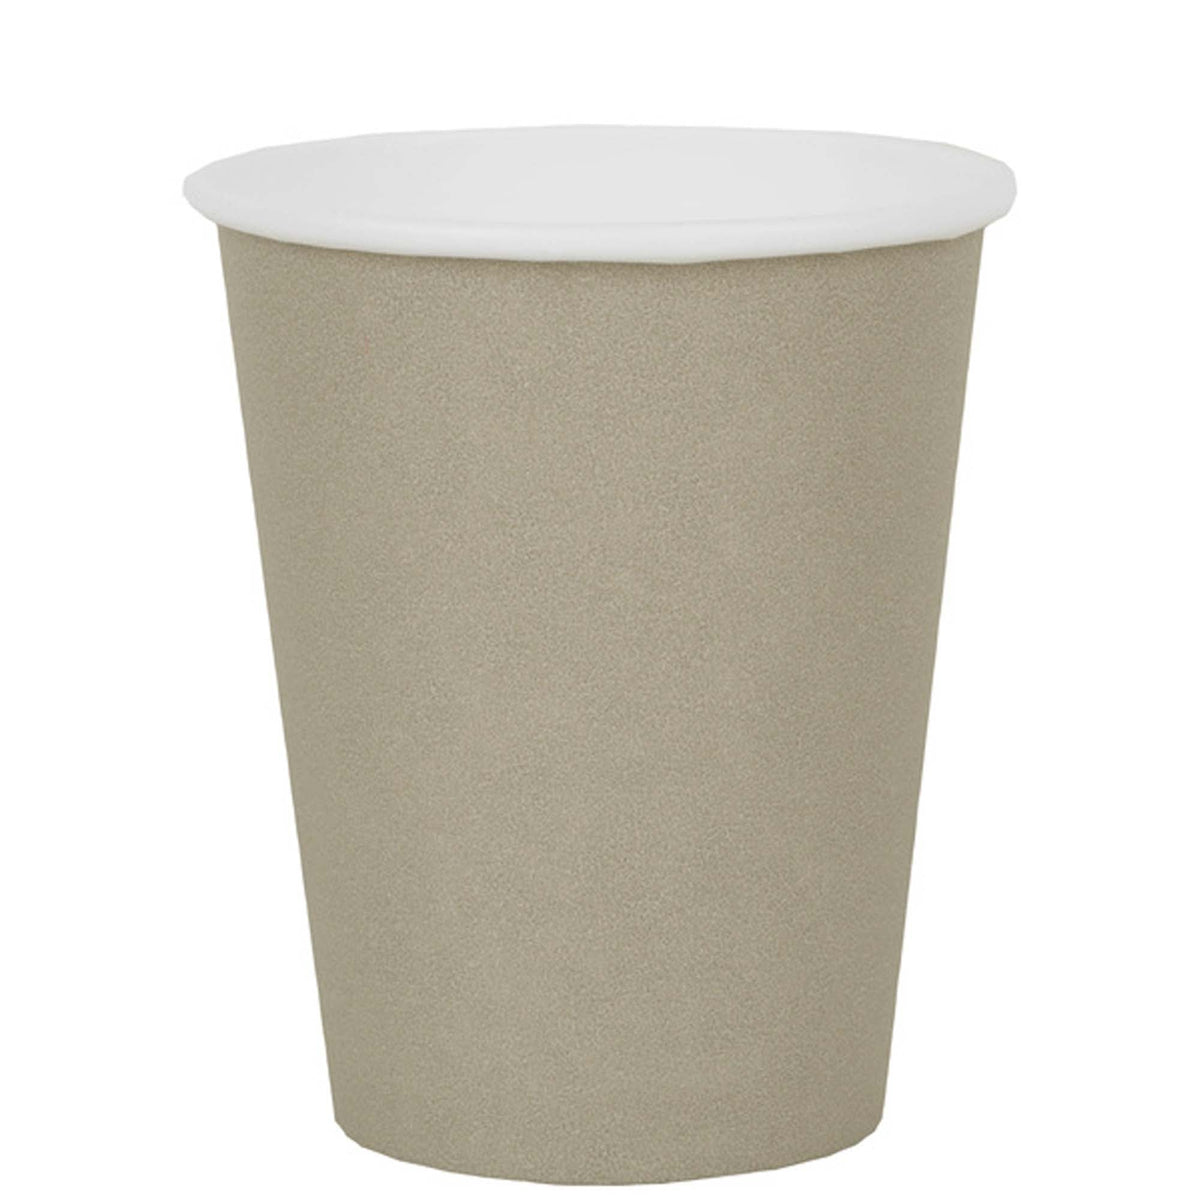 SANTEX Everyday Entertaining Taupe Brown Party Paper Cups, 9 Oz, 10 Count 3660380073079